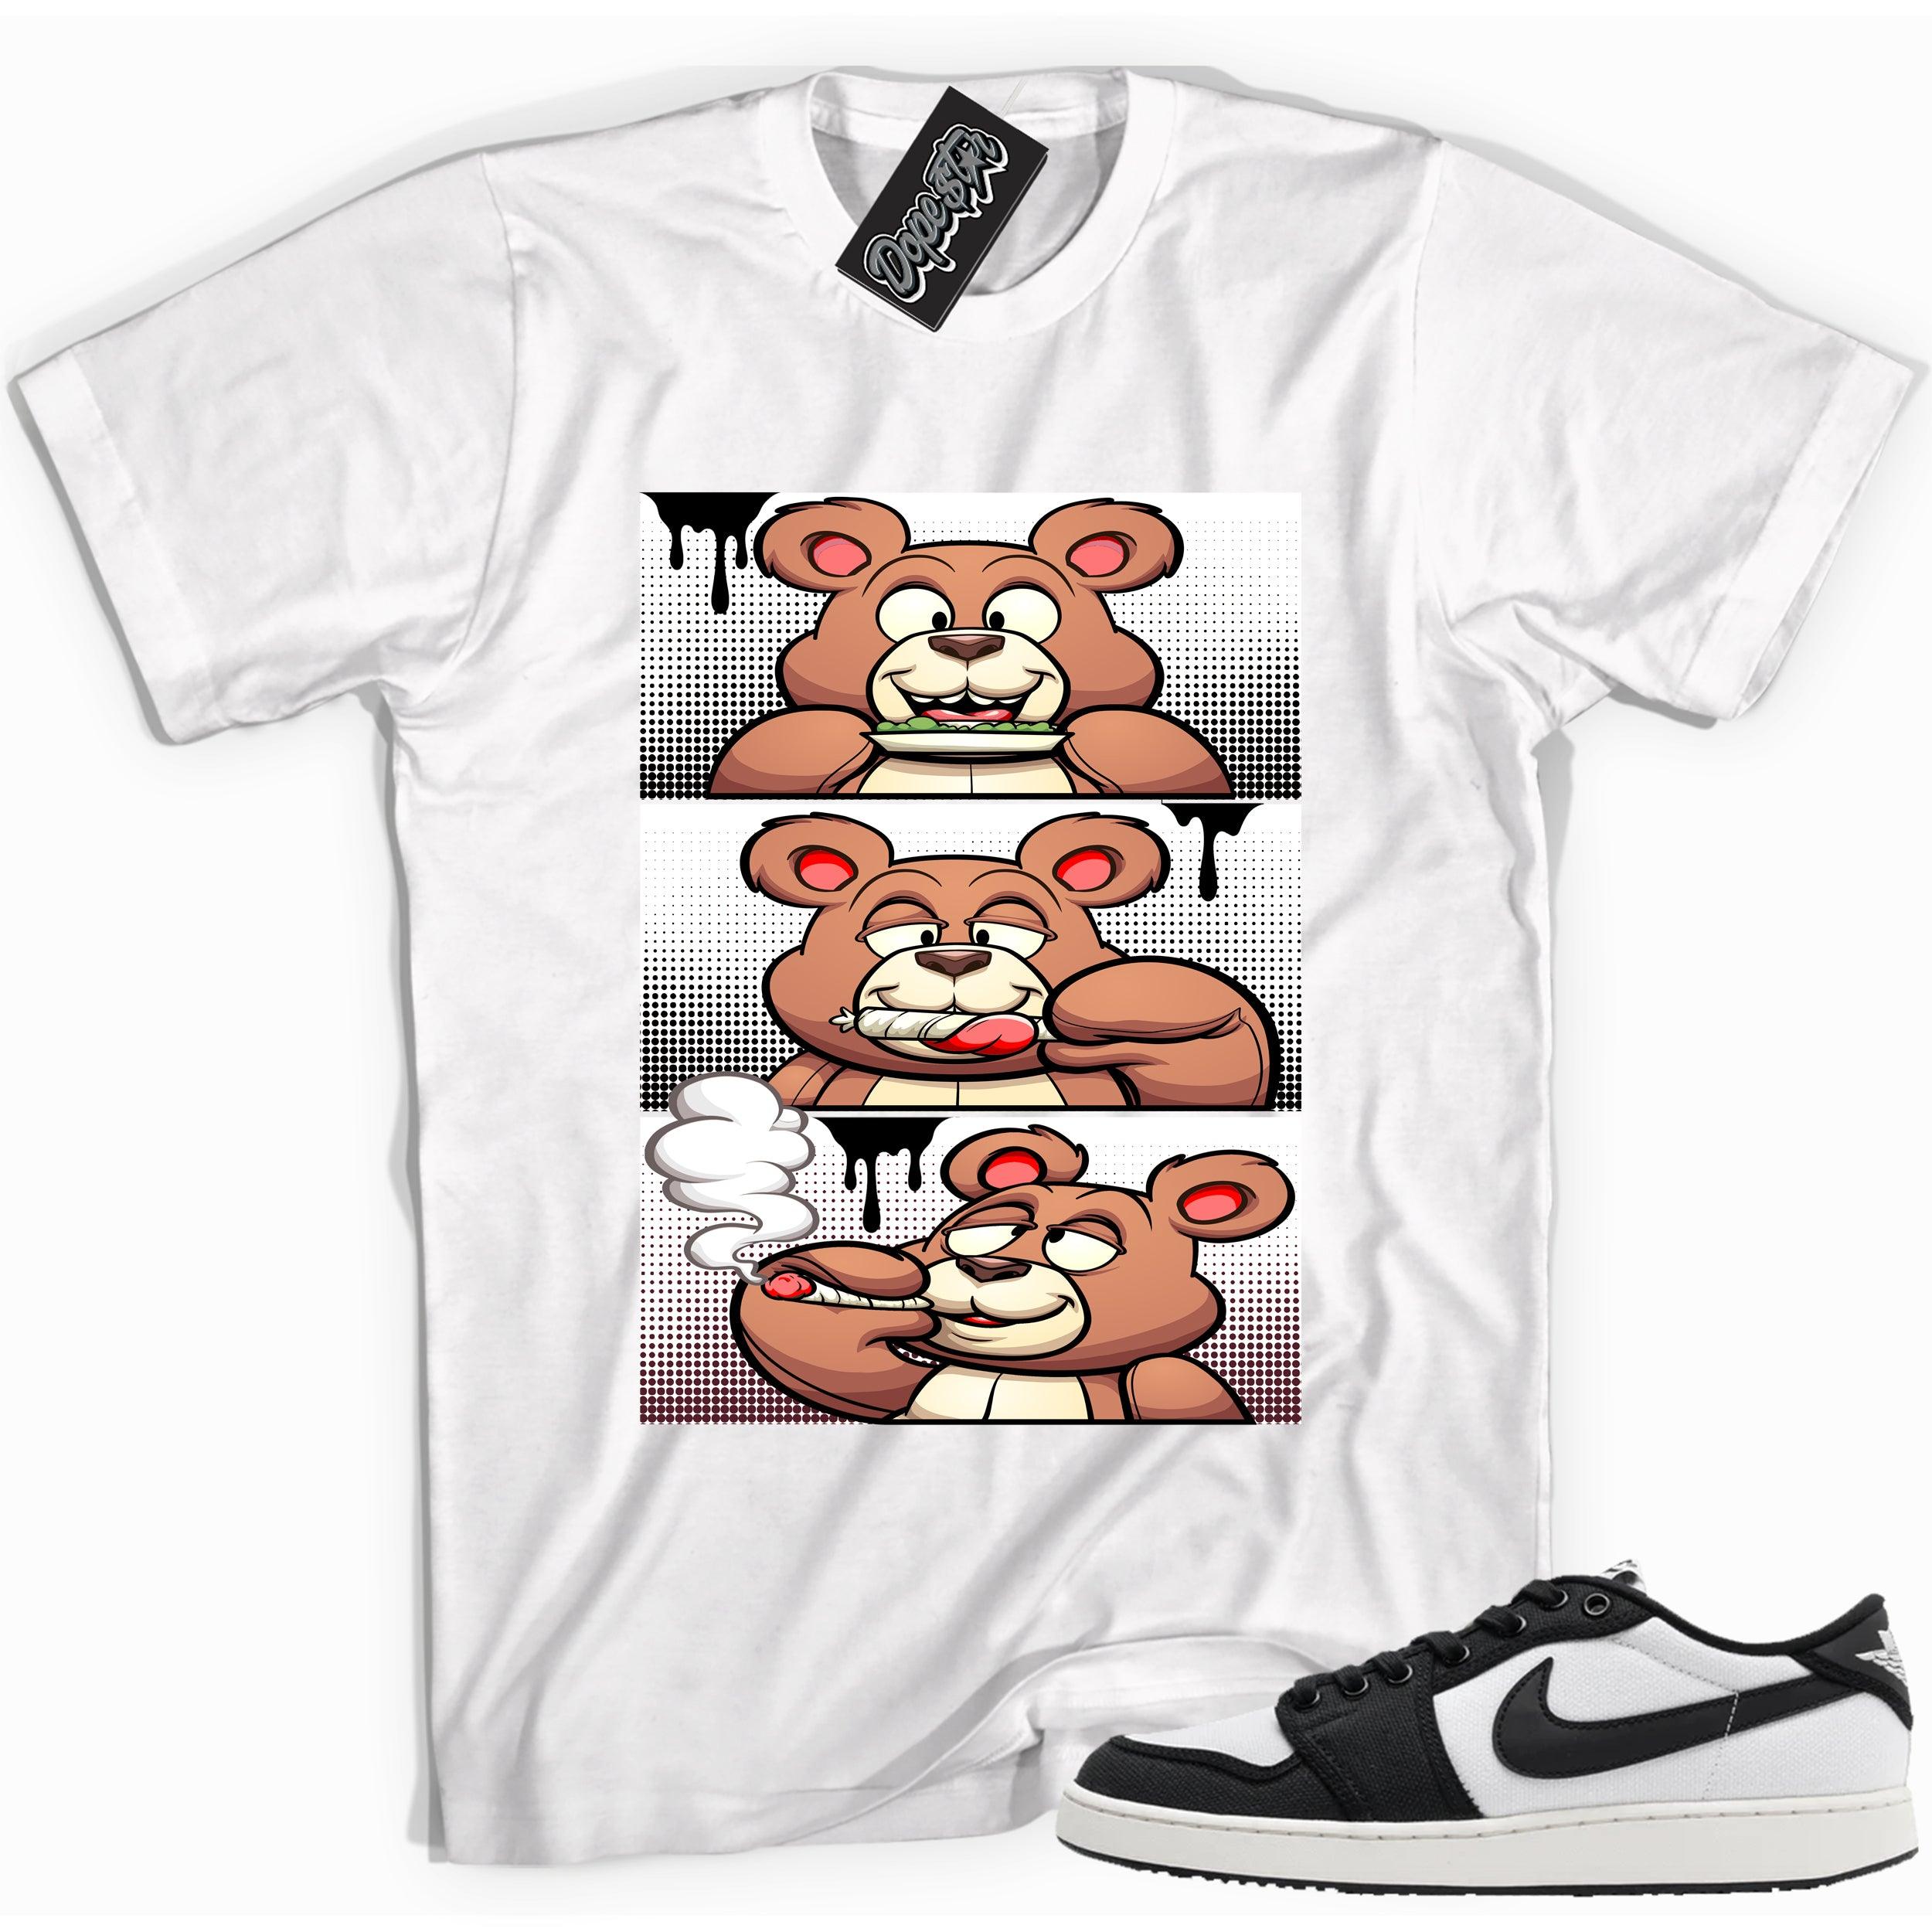 Cool white graphic tee with 'roll it lick it smoke it bear' print, that perfectly matches Air Jordan 1 Retro Ajko Low Black & White sneakers.